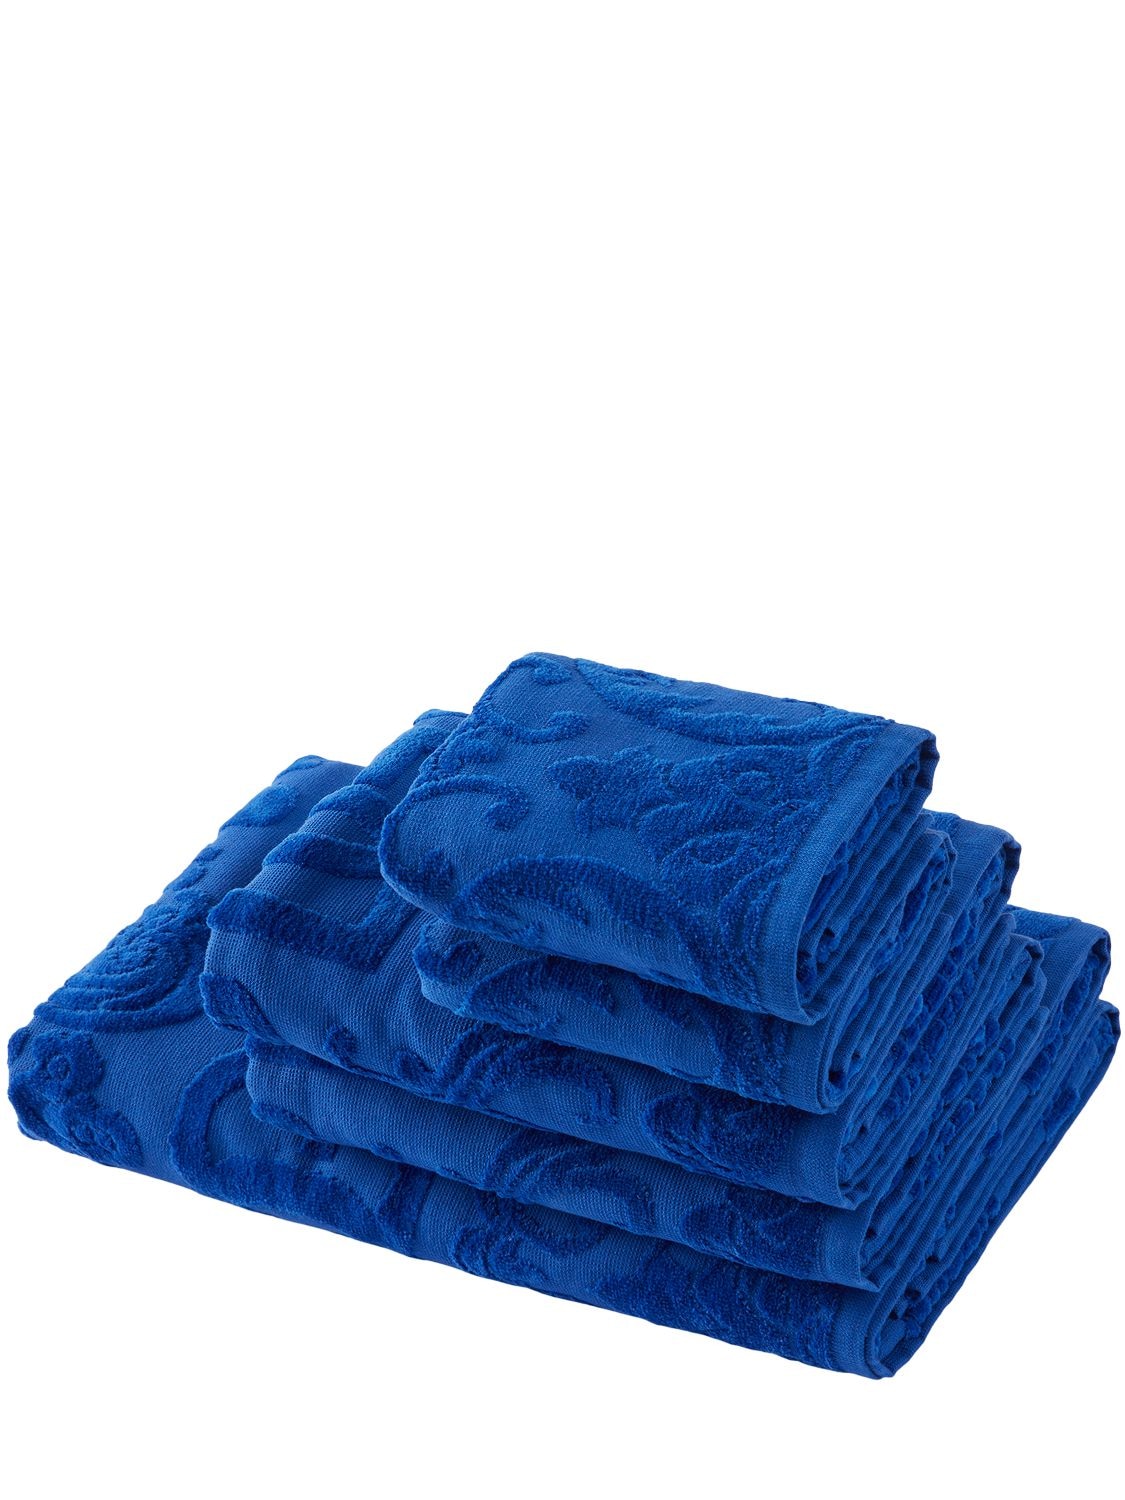 Image of Set Of 5 Towels